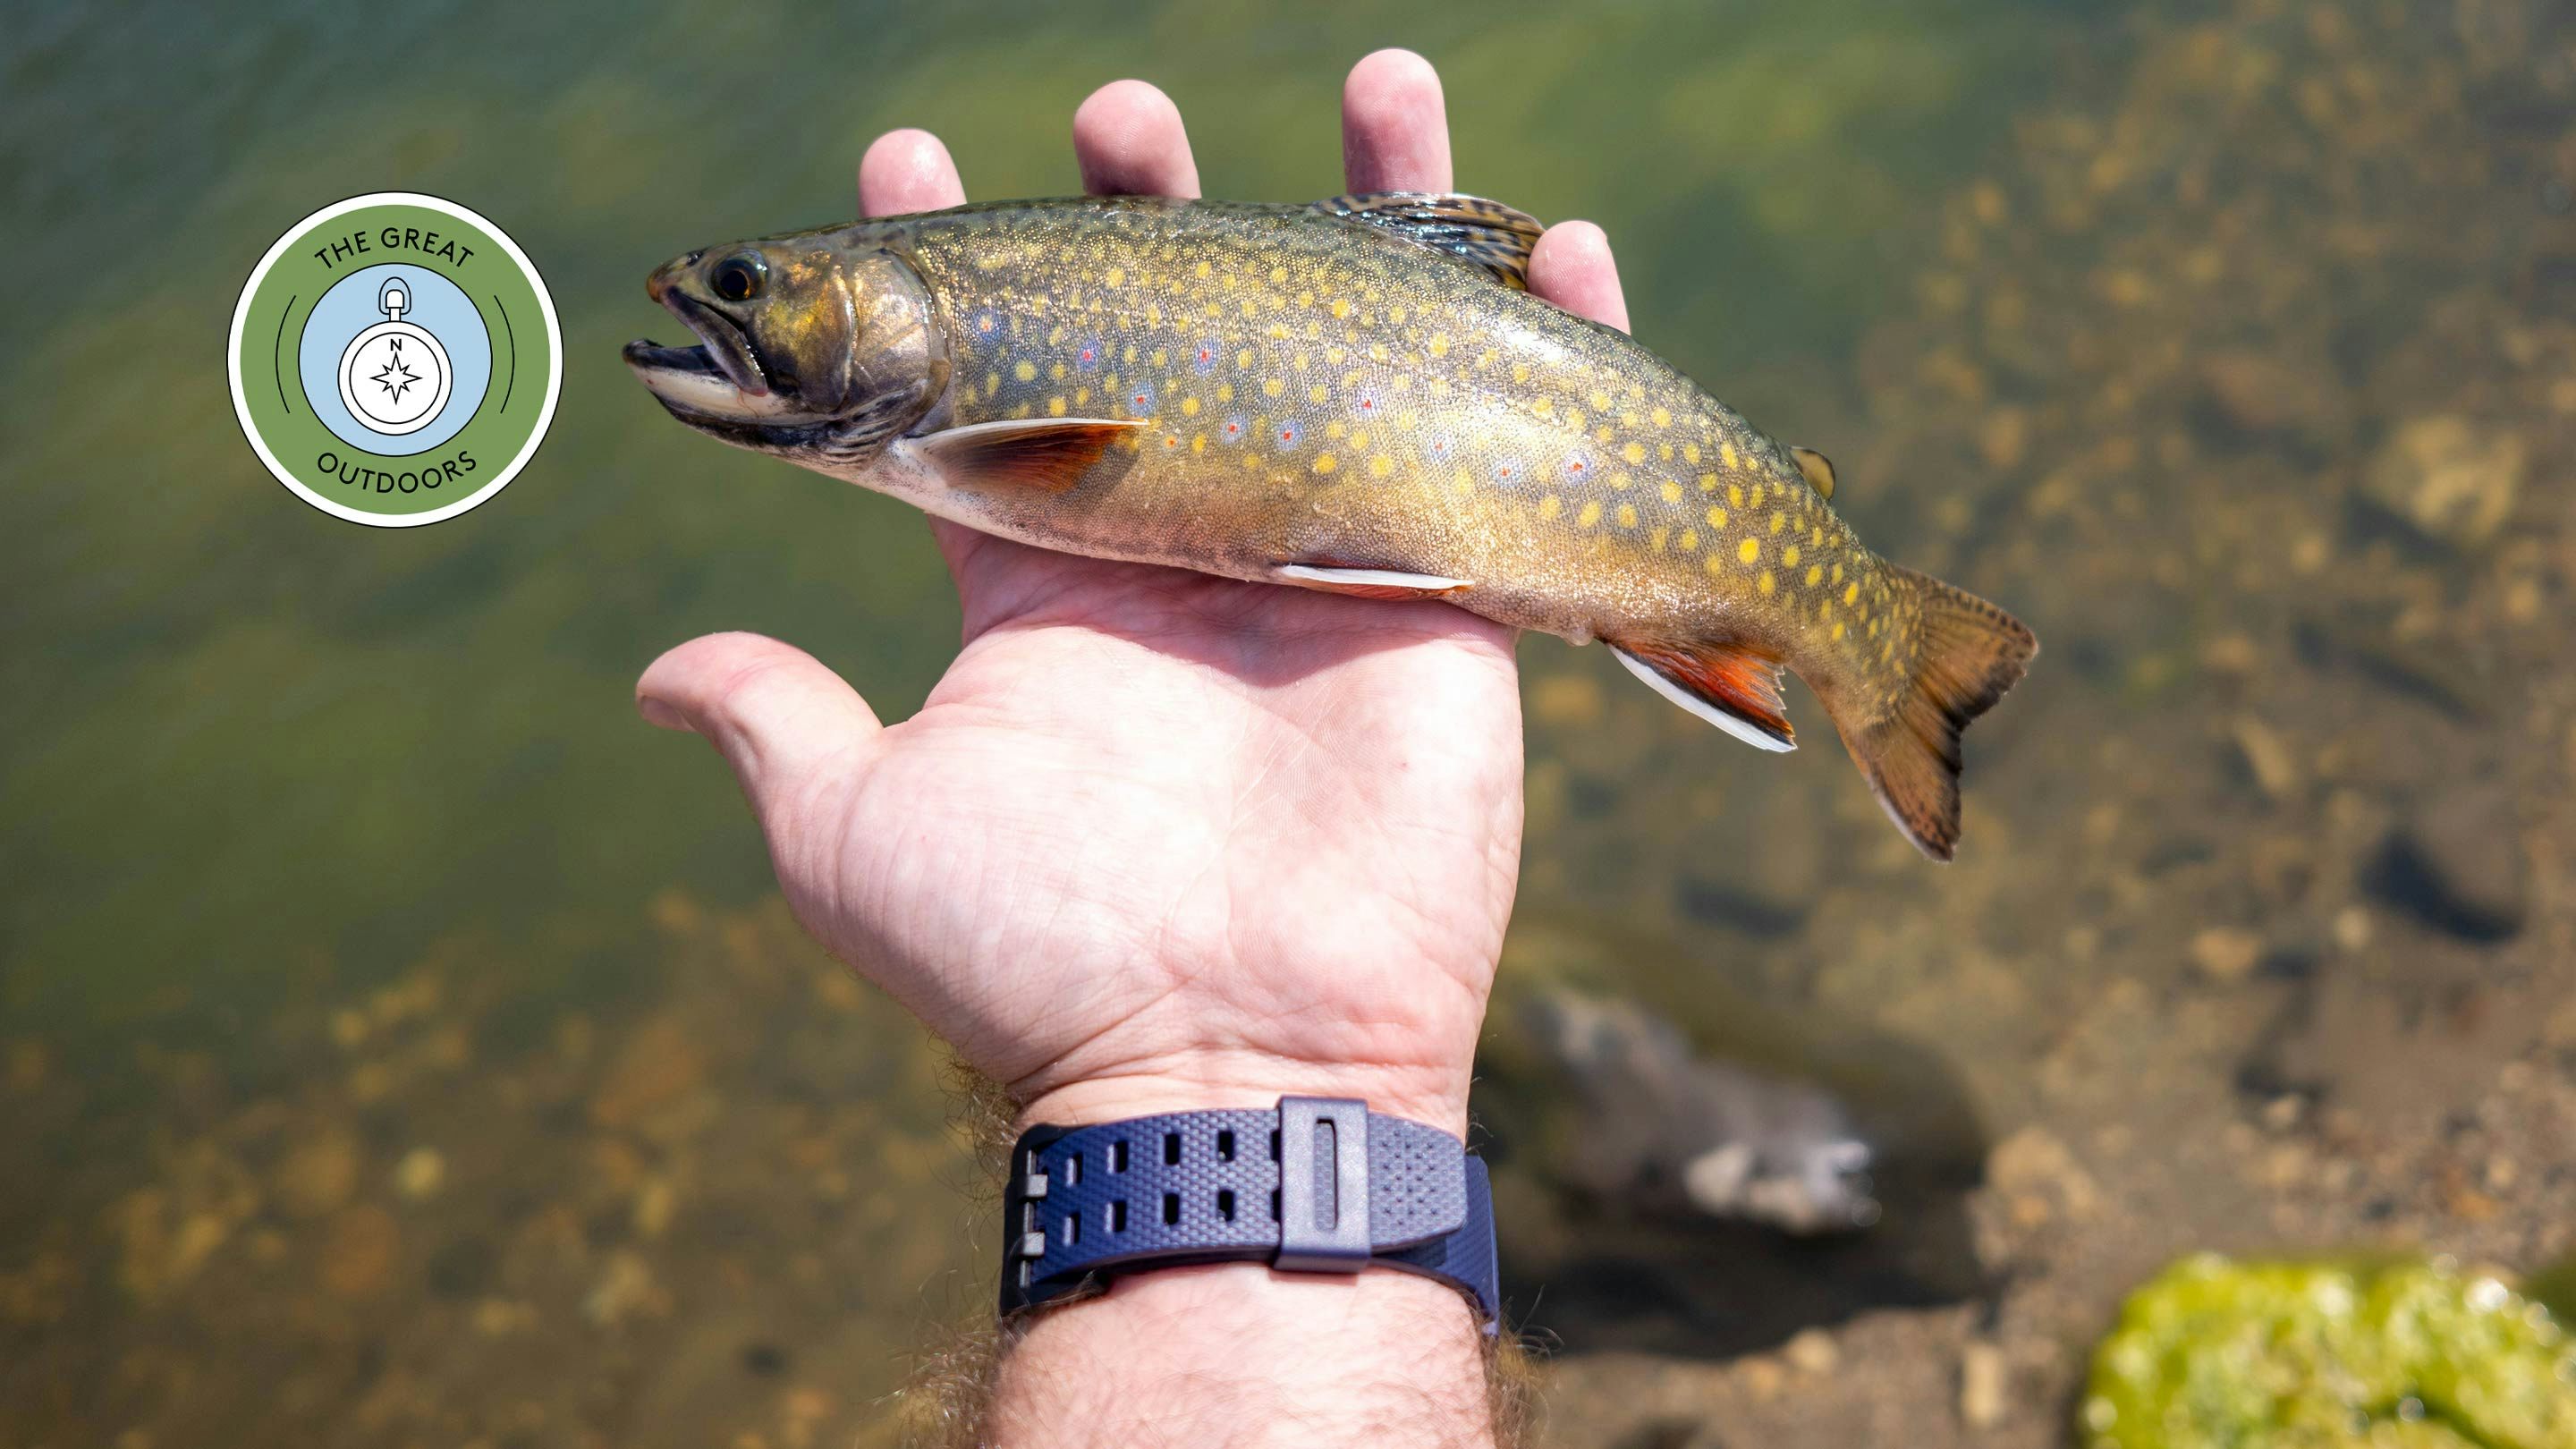 Hands-On I Landed This Trout Using Casio's $26 Fishing Watch